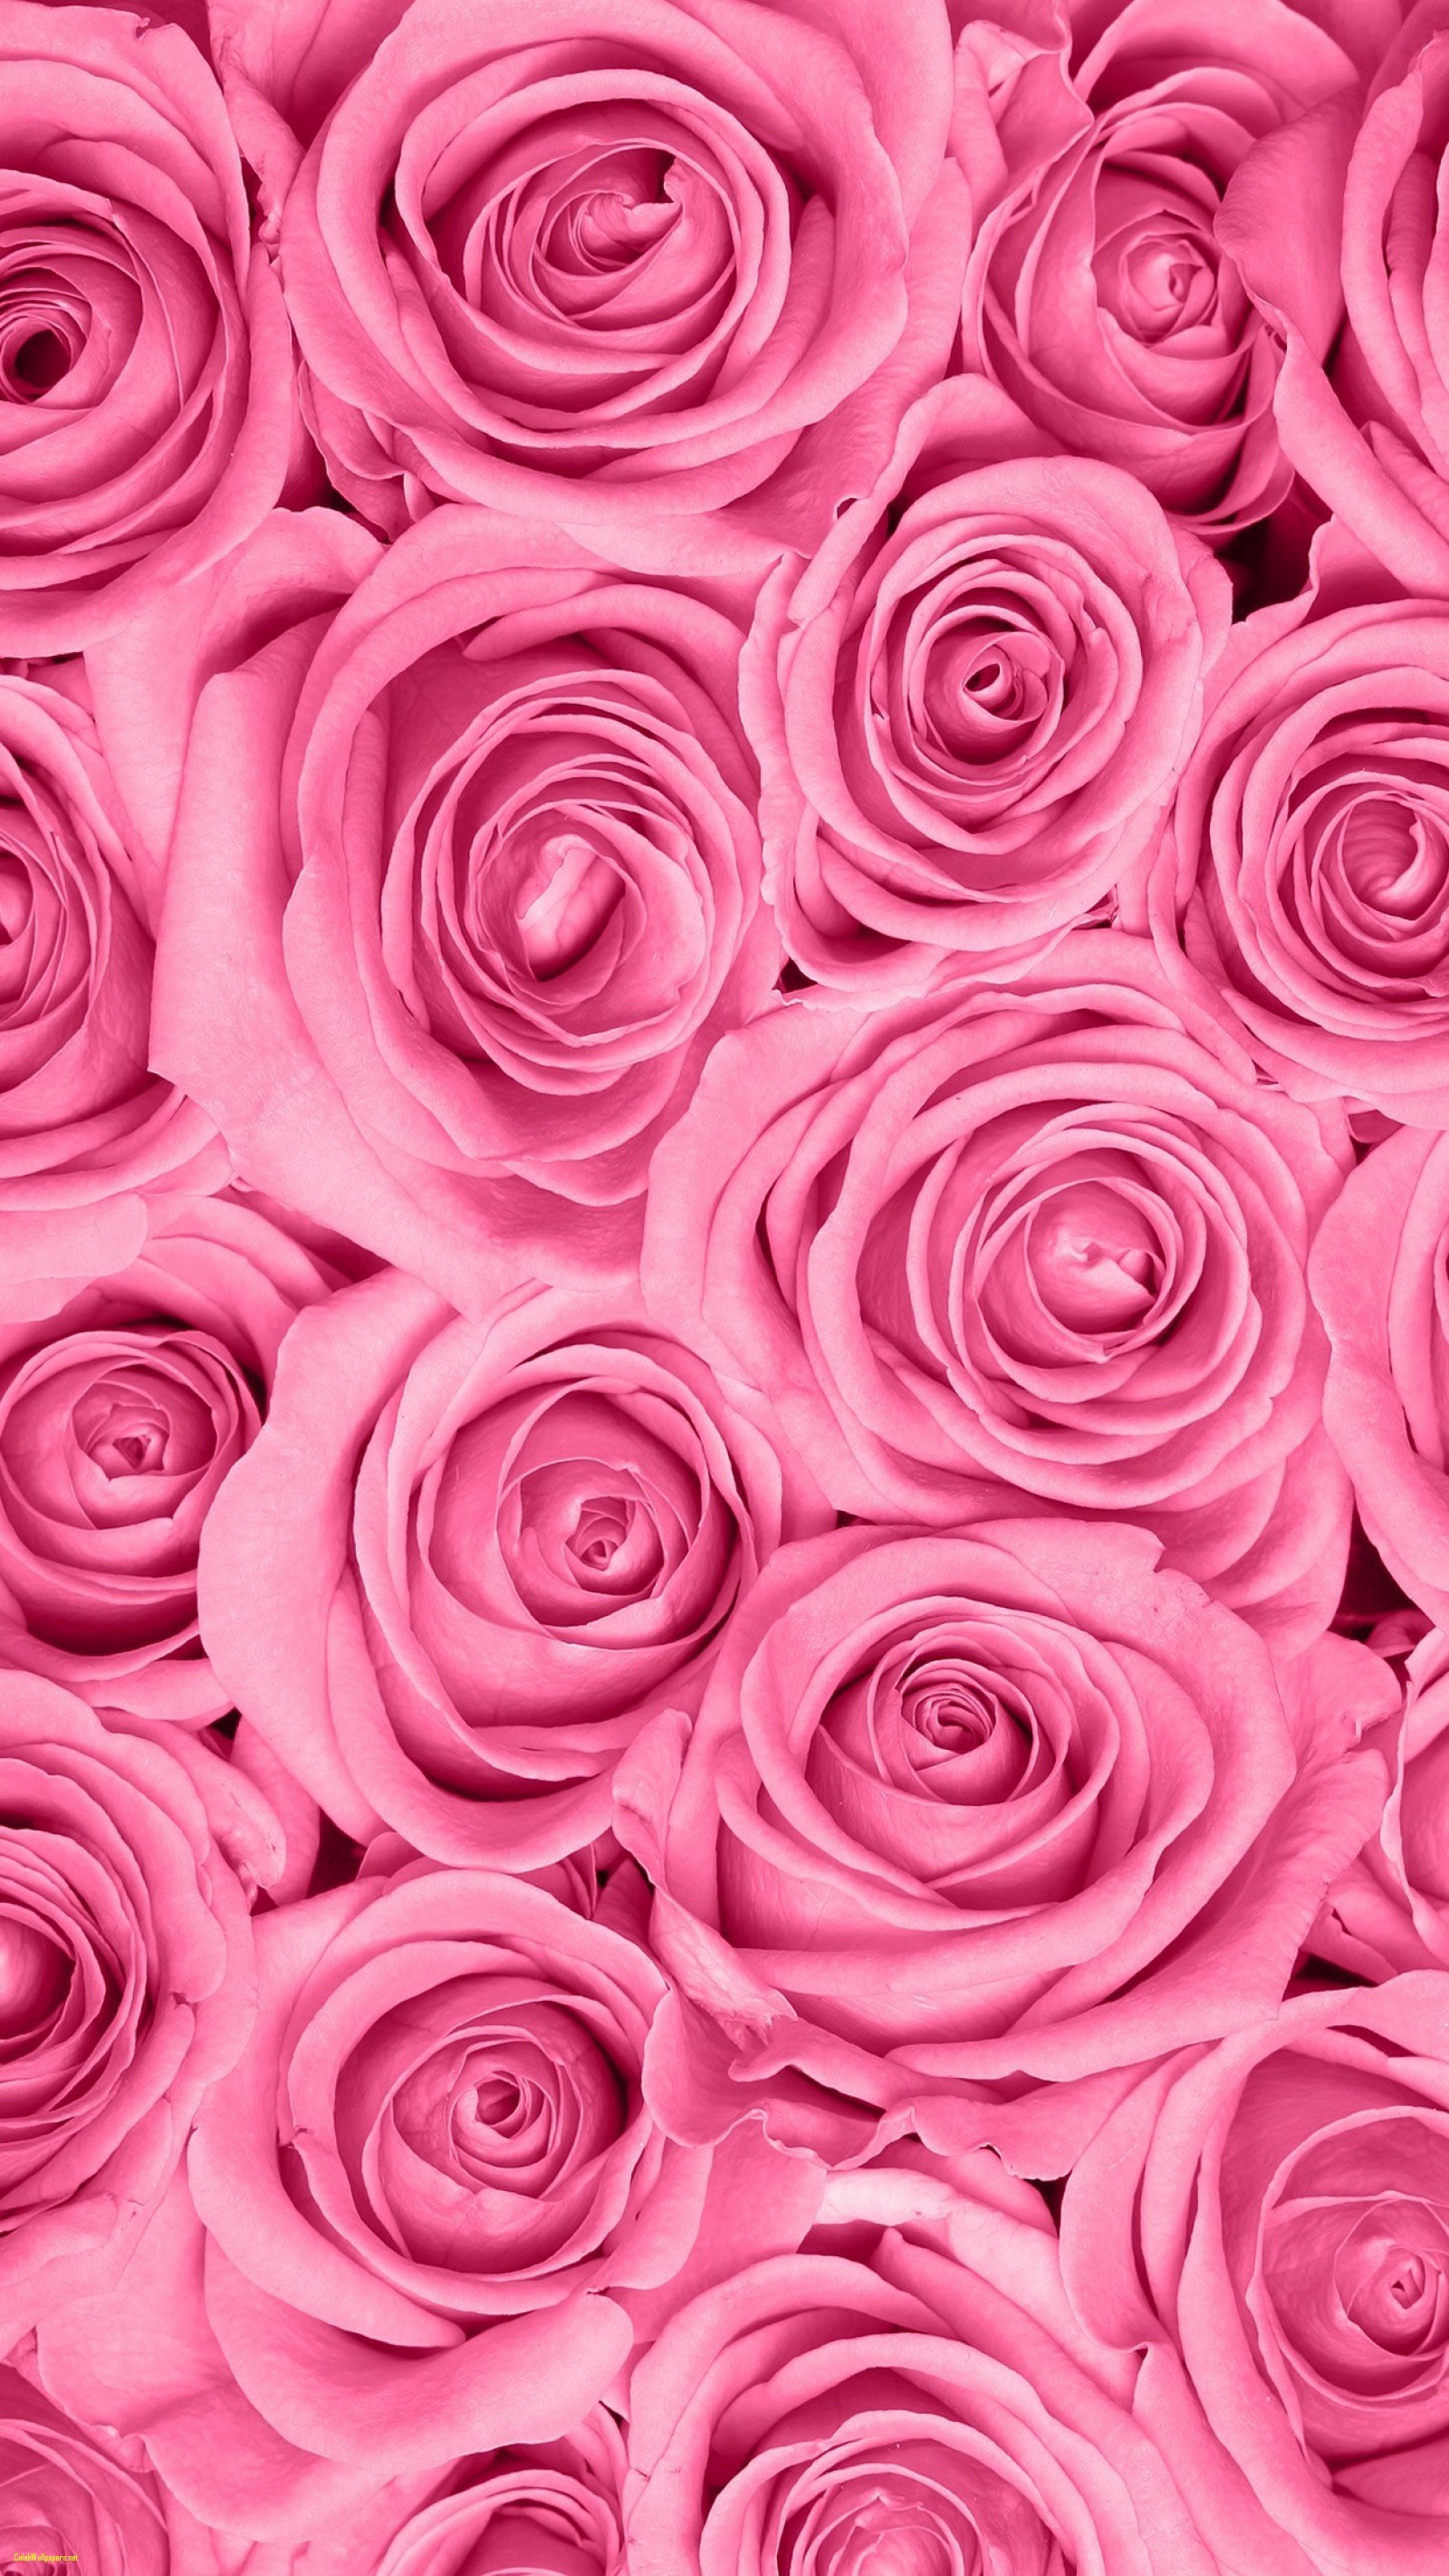 66 Pink Rose Wallpapers on WallpaperPlay